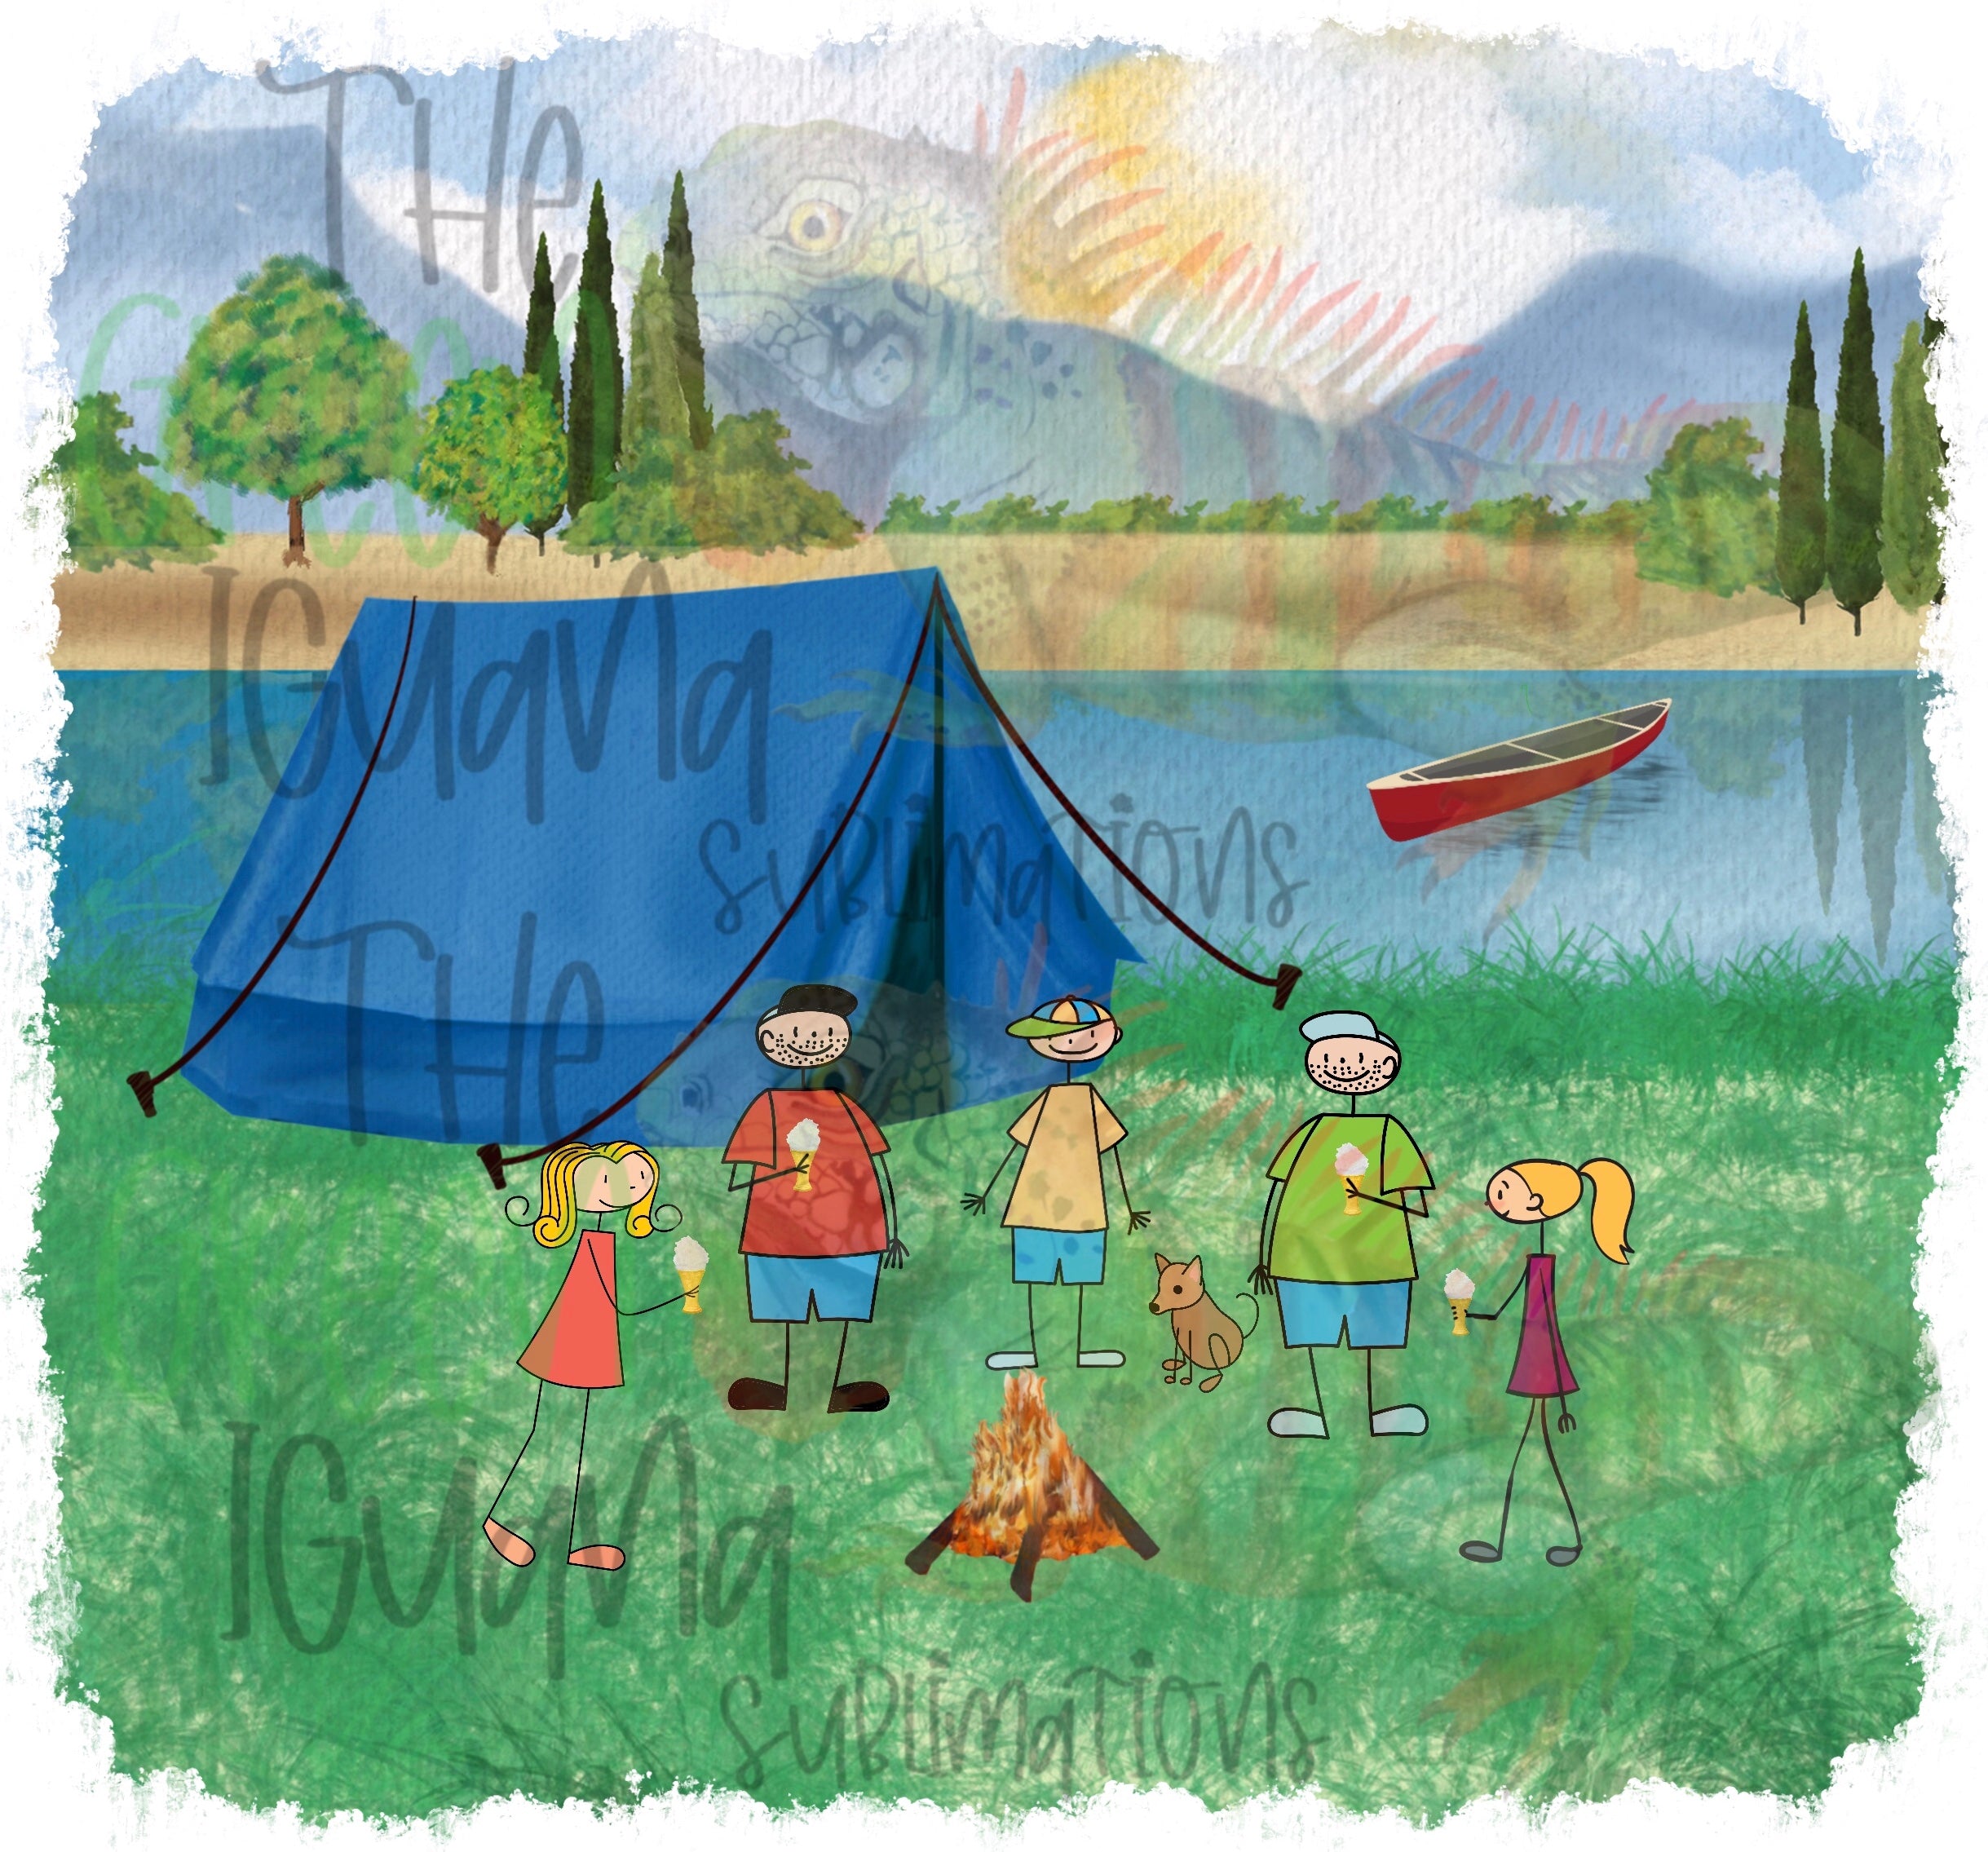 Campground scene with tent DIGITAL